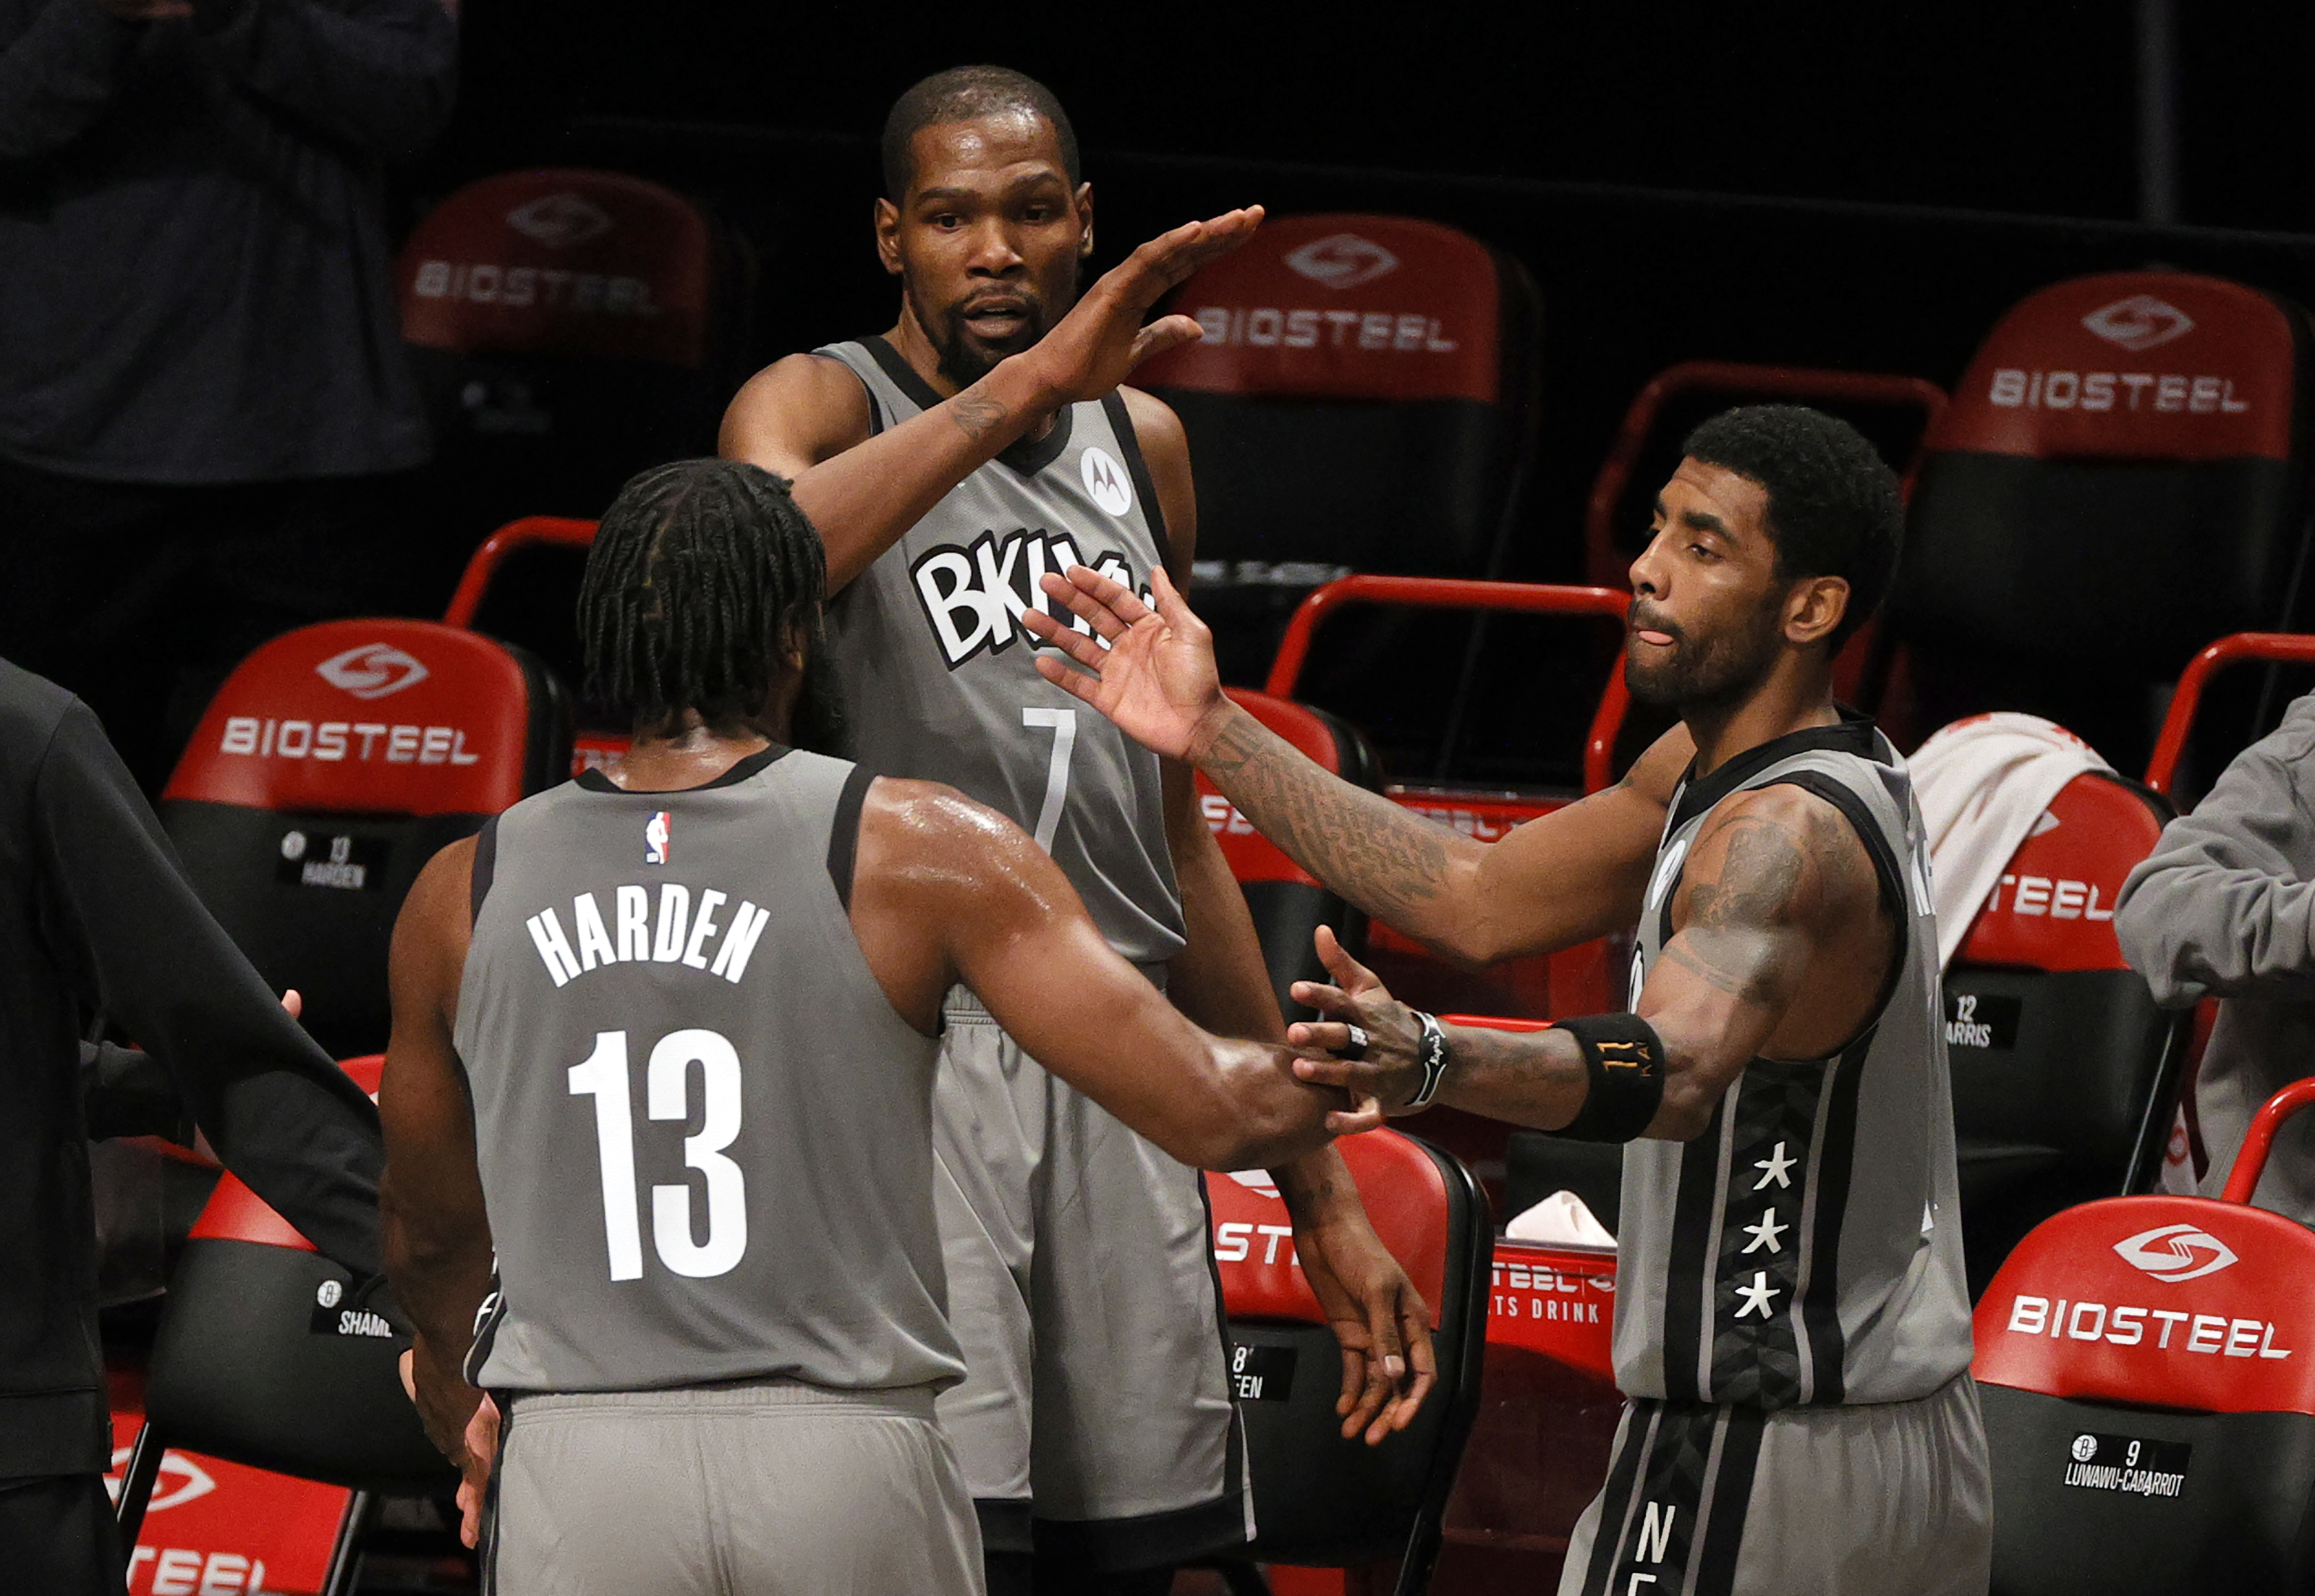 Nets: Remembering the franchise's forgotten Big 3